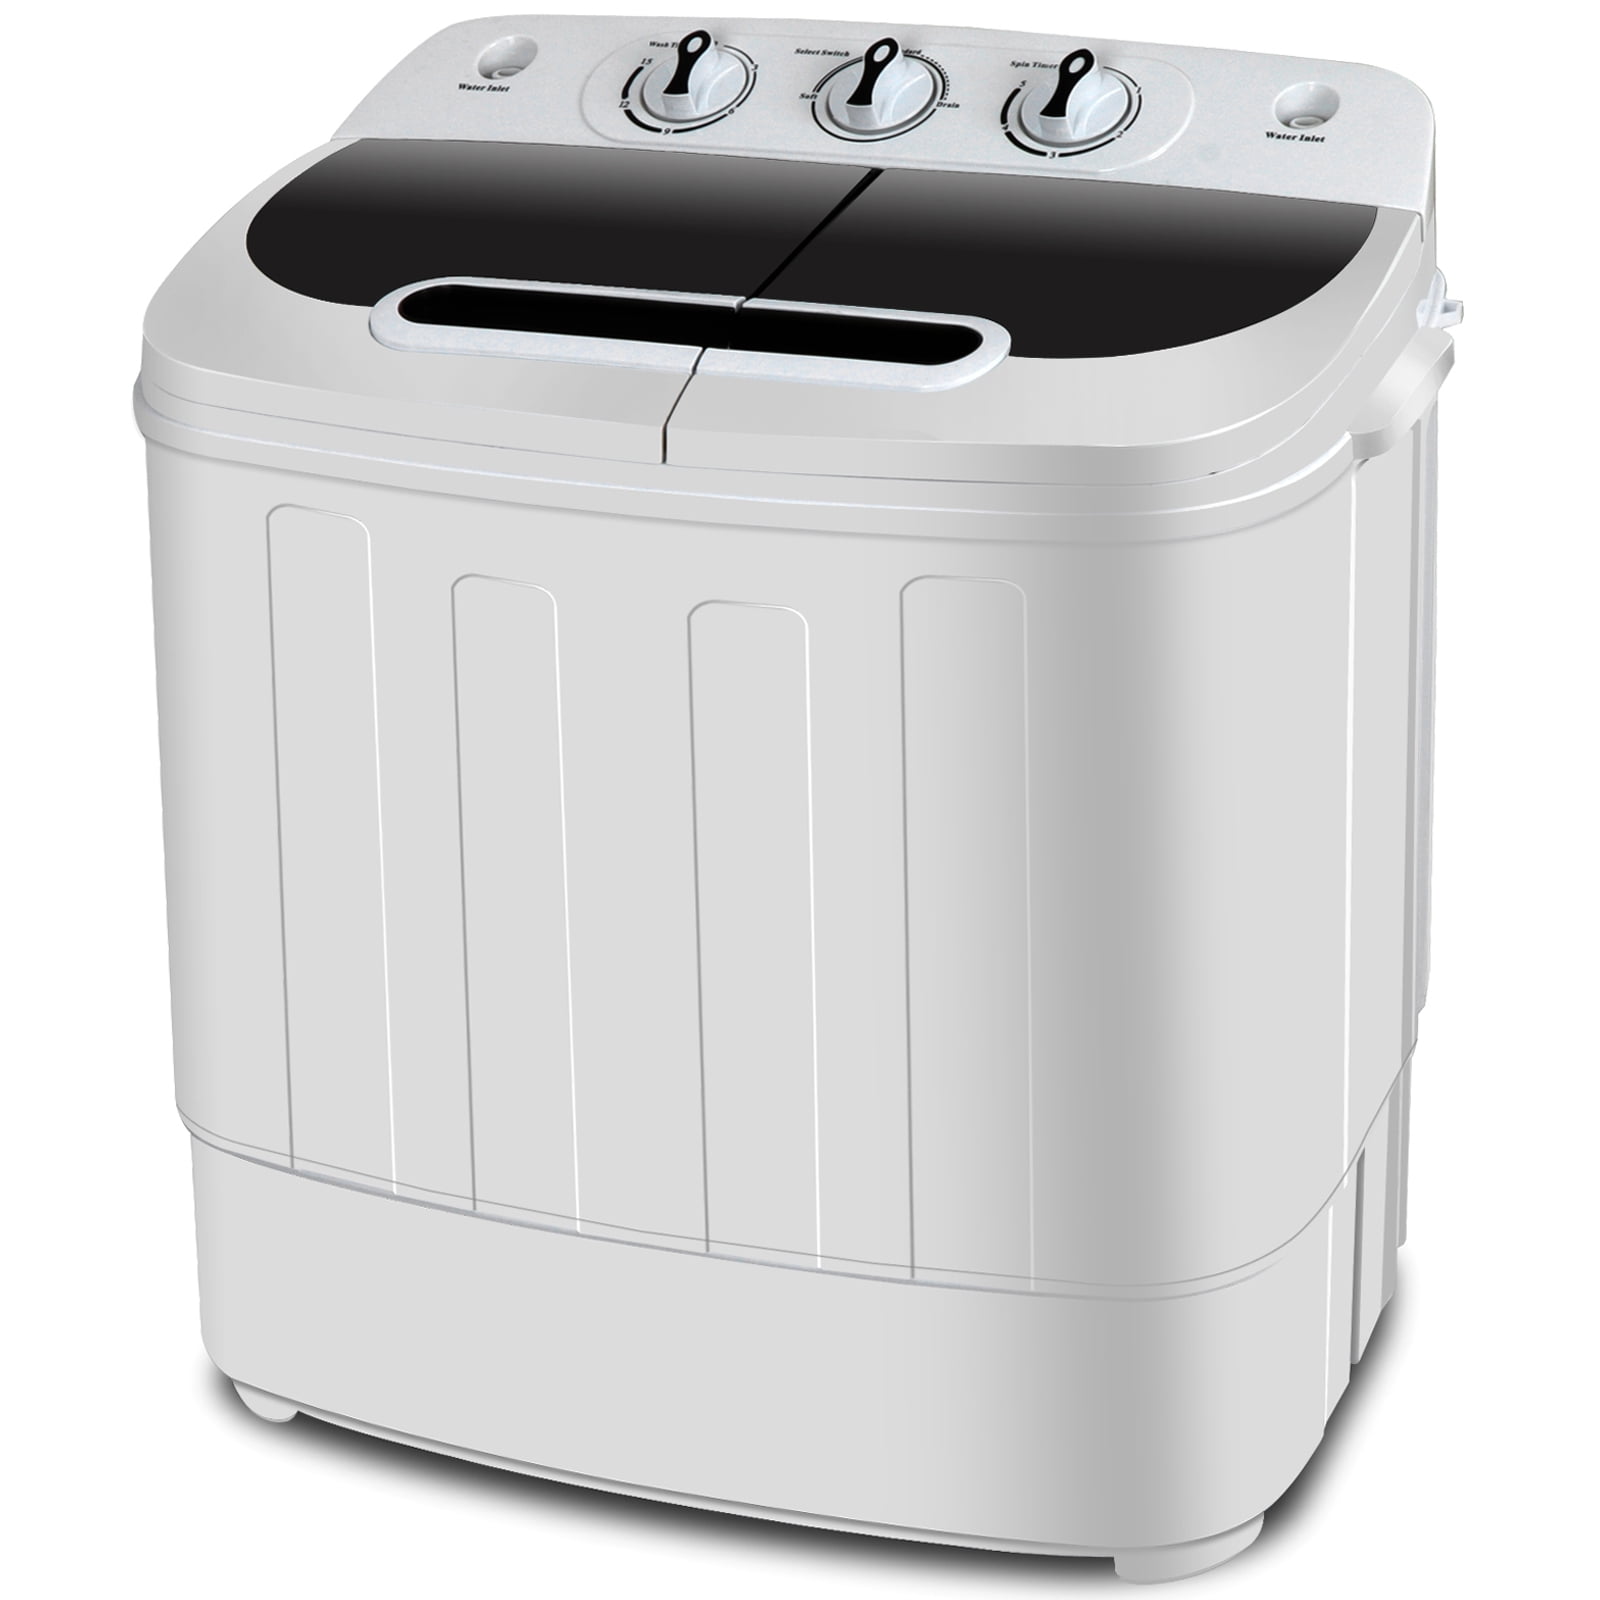 ZENY™ Portable Full-Automatic Washing Machine with 10 Programs 8 Water  Levels 8lbs Capacity